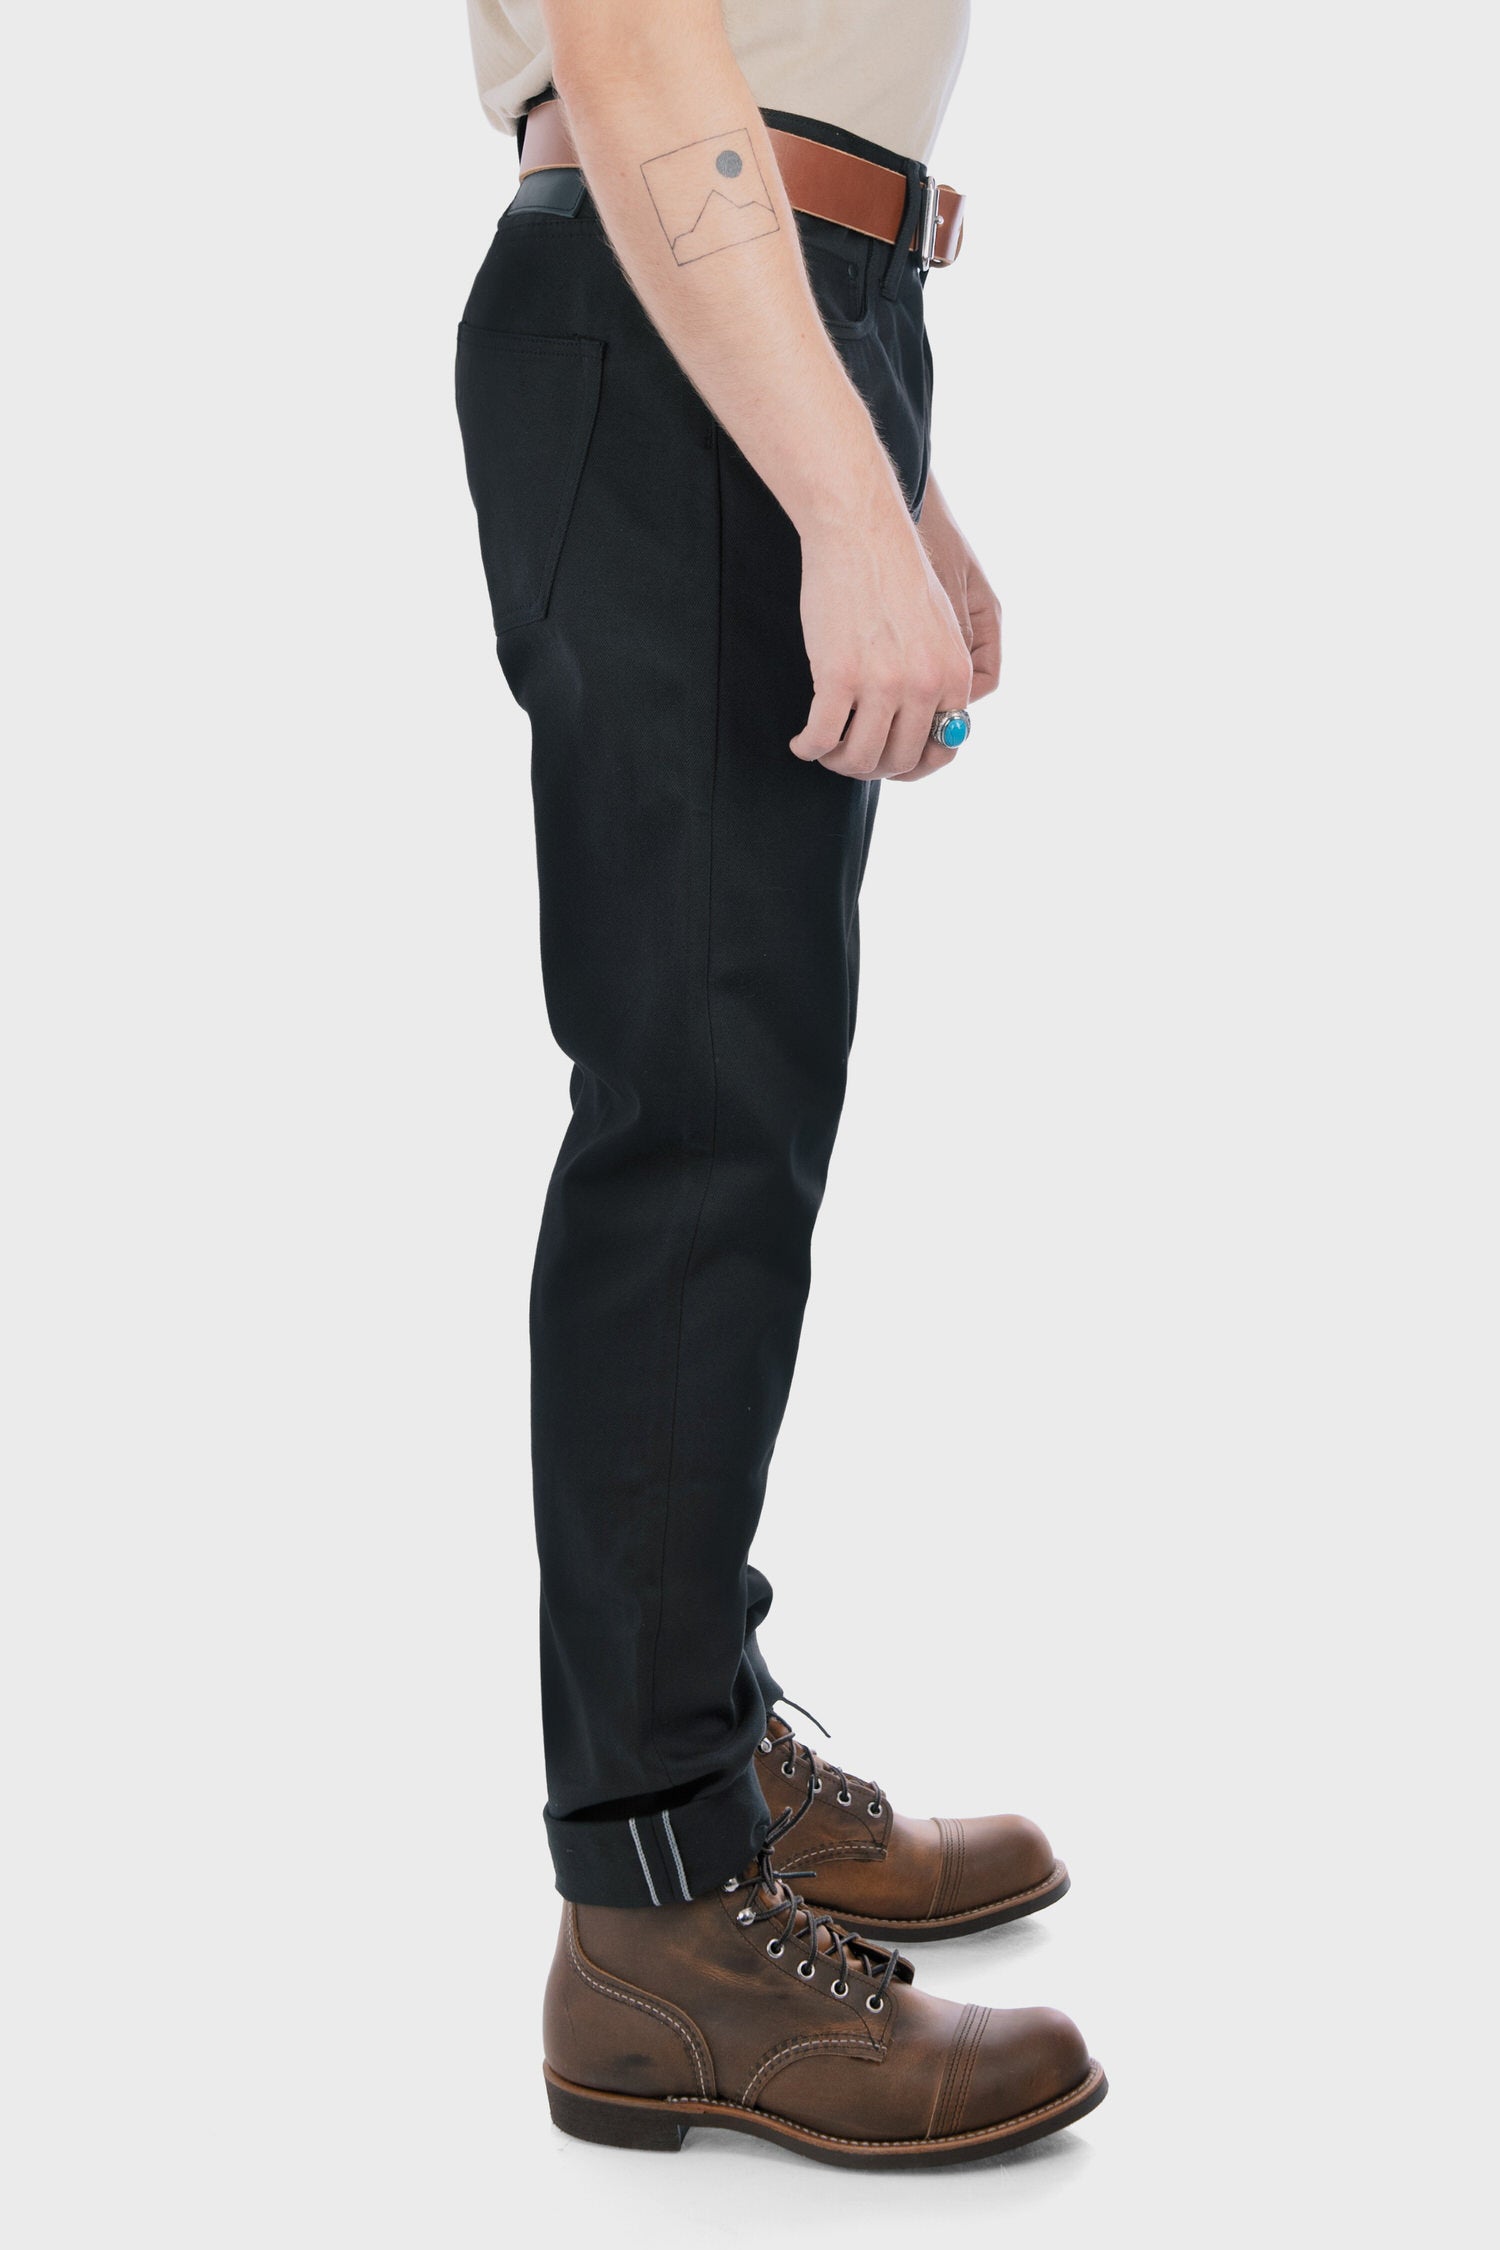 Unbranded Relaxed Tapered Fit Chino in Black